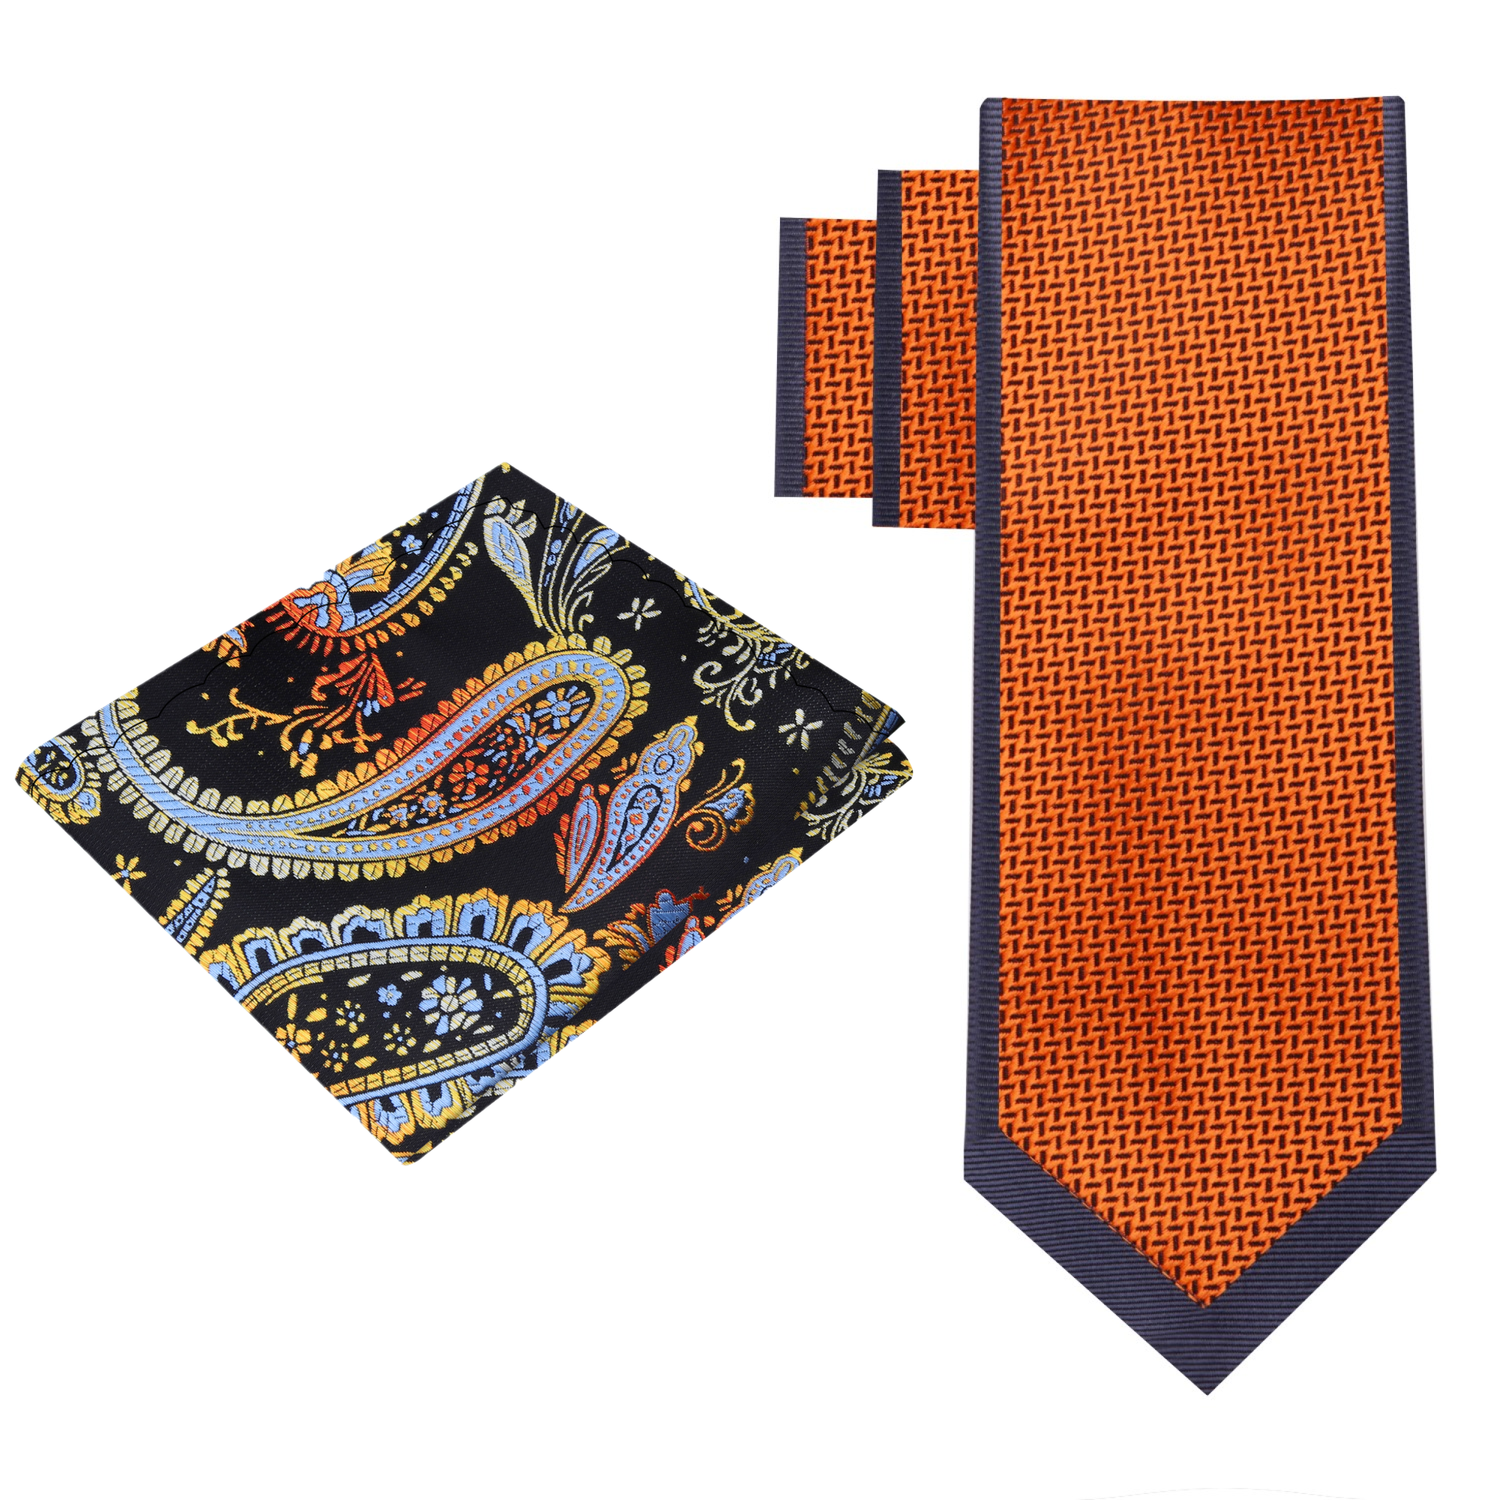 View 2: Orange with Crosshatch texture and grey border pattern silk necktie and accenting pocket square